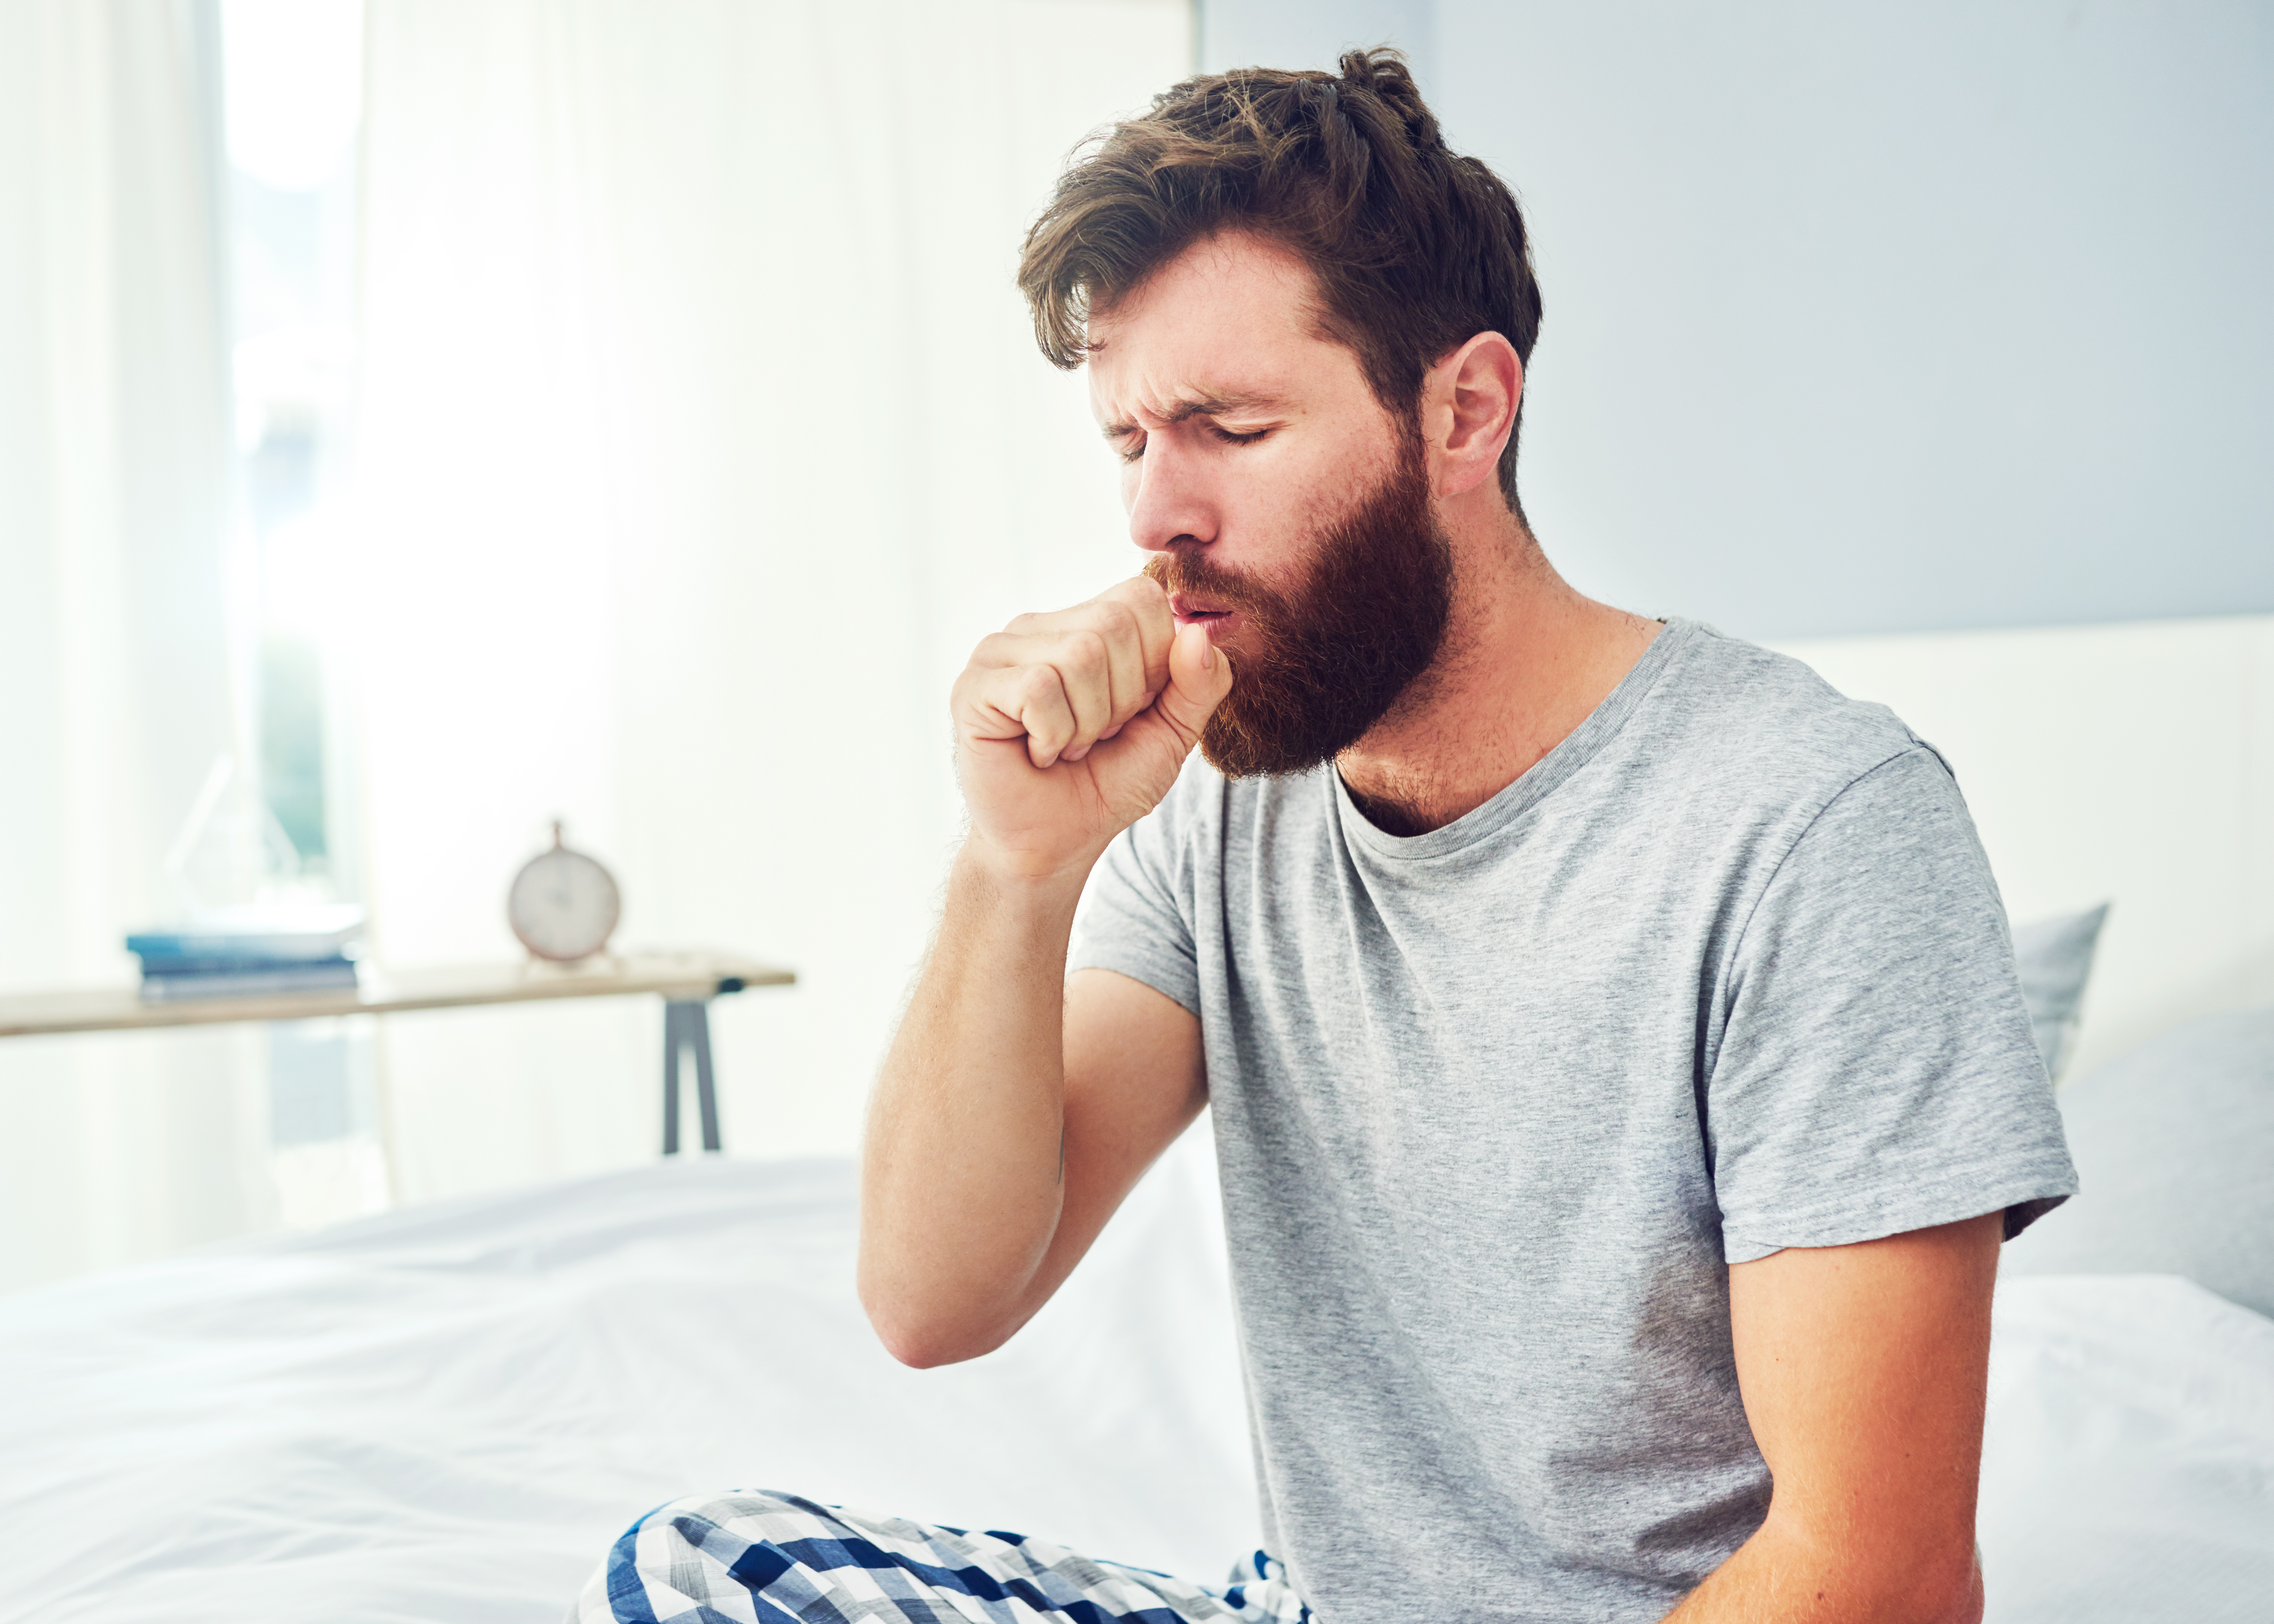 What is a continuous cough and what should I do if I have it?